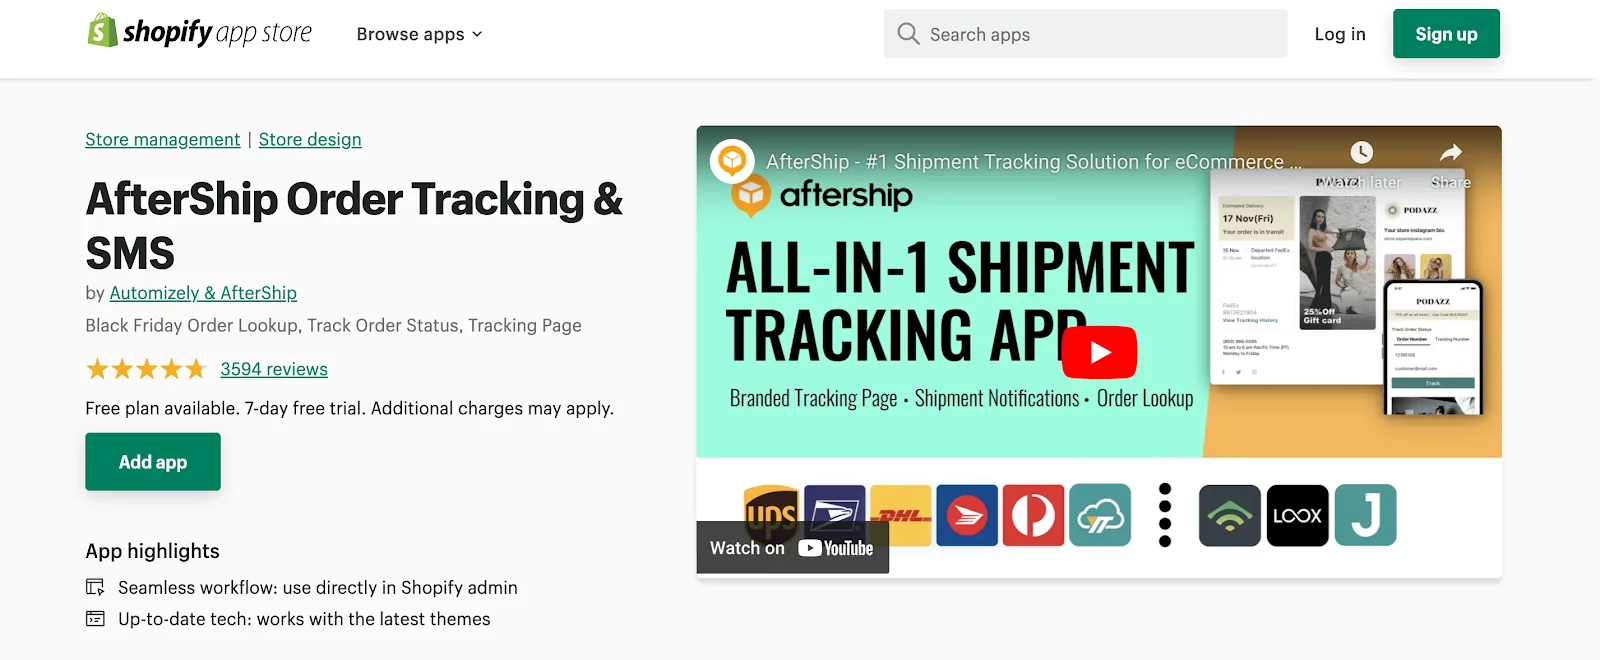 Top 10 Best Shipping Apps for Shopify